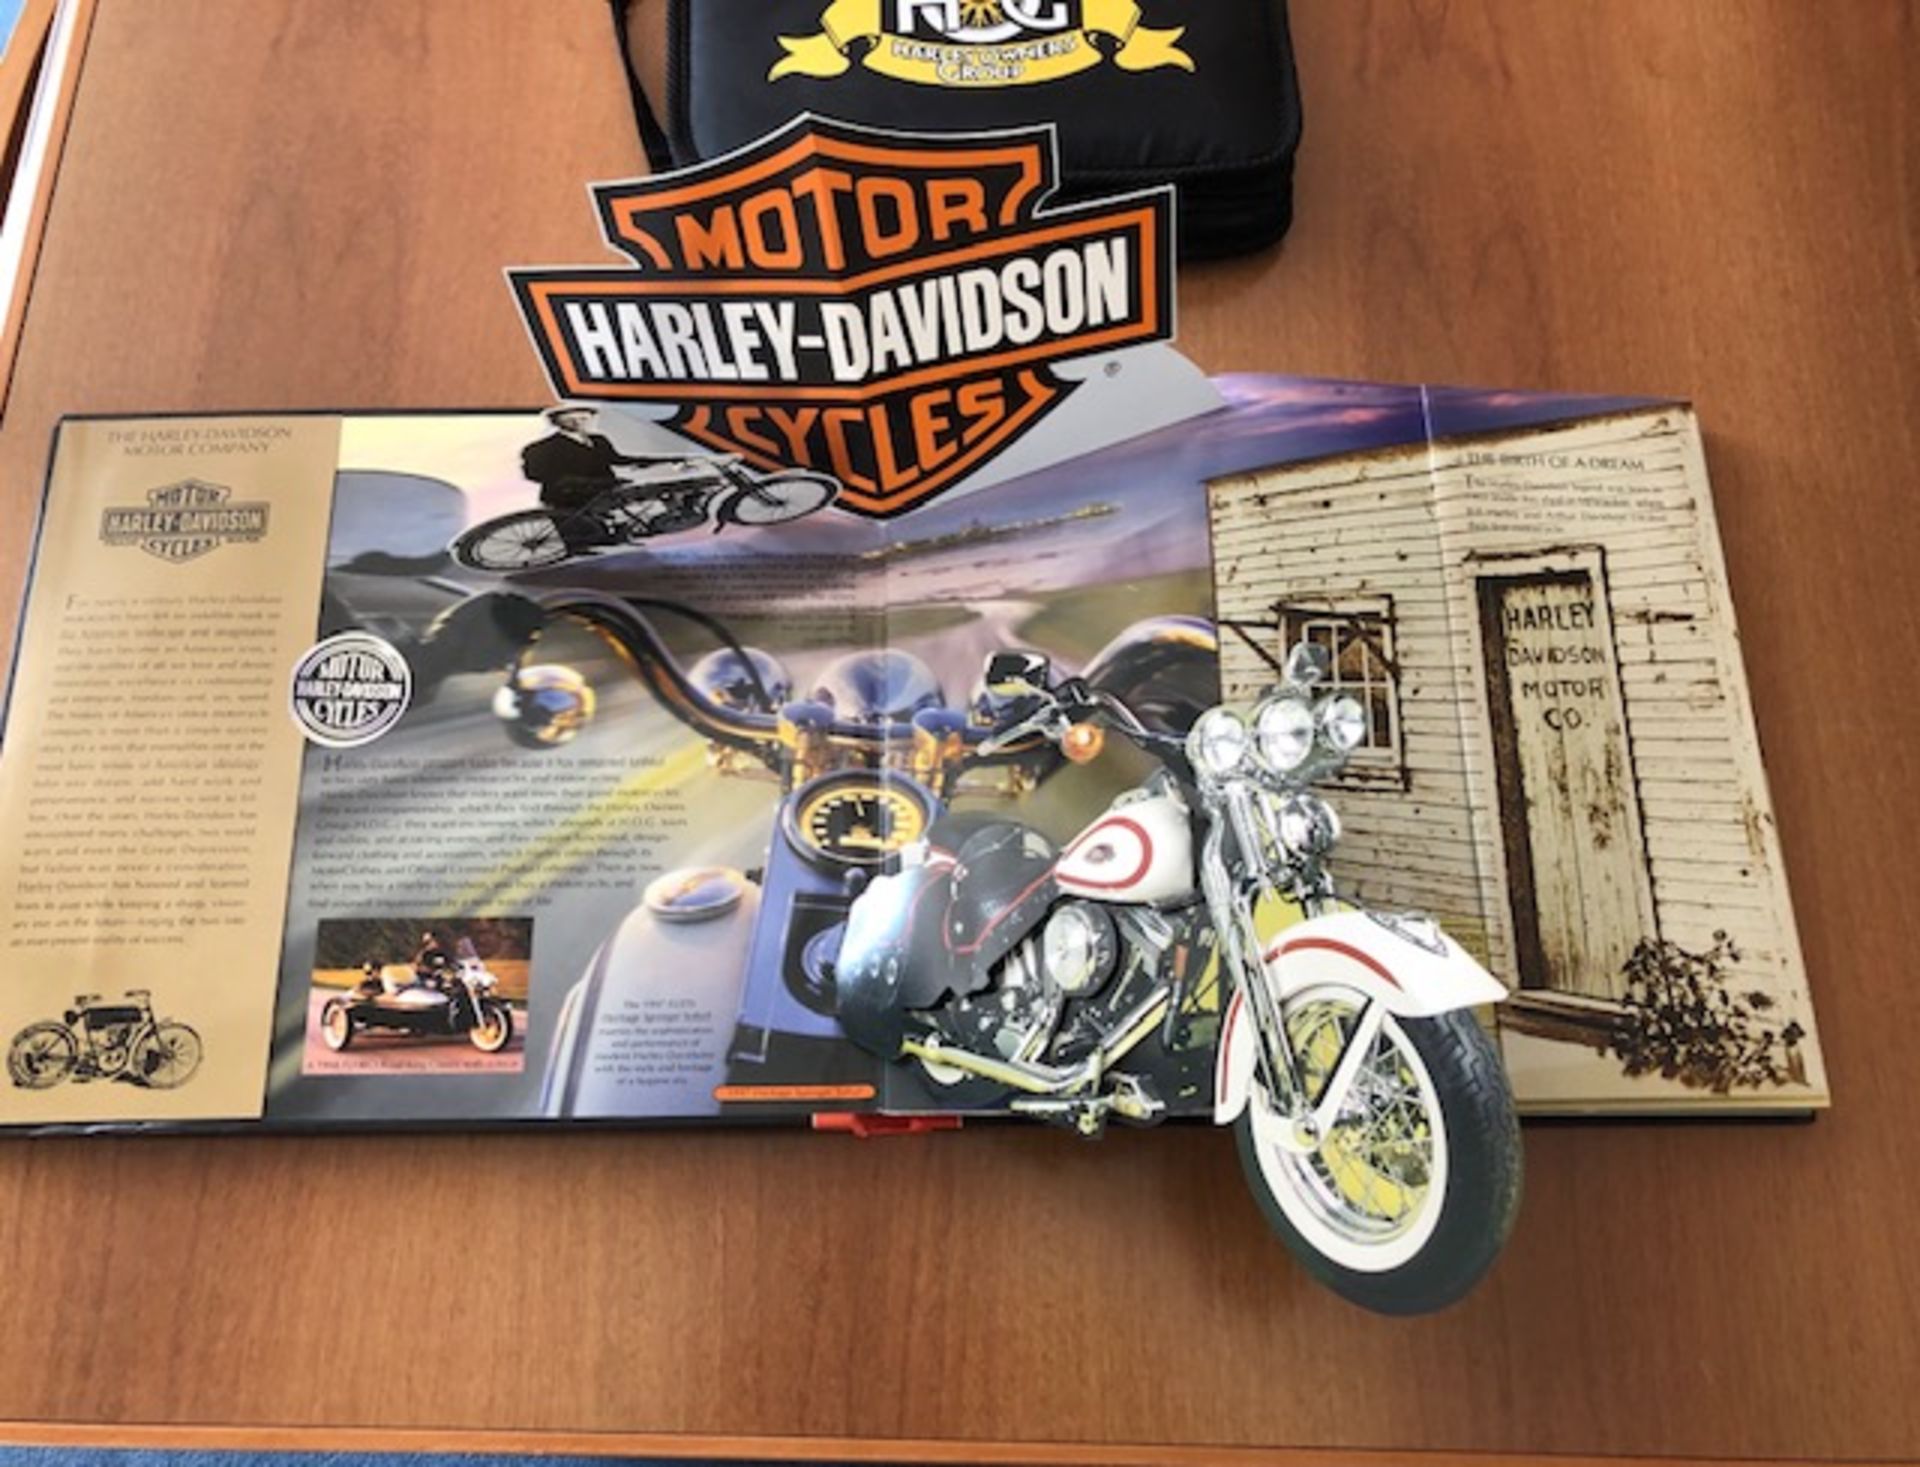 Harley Davidson pop up book in good condition and wallet containing H.O.G. books and badges